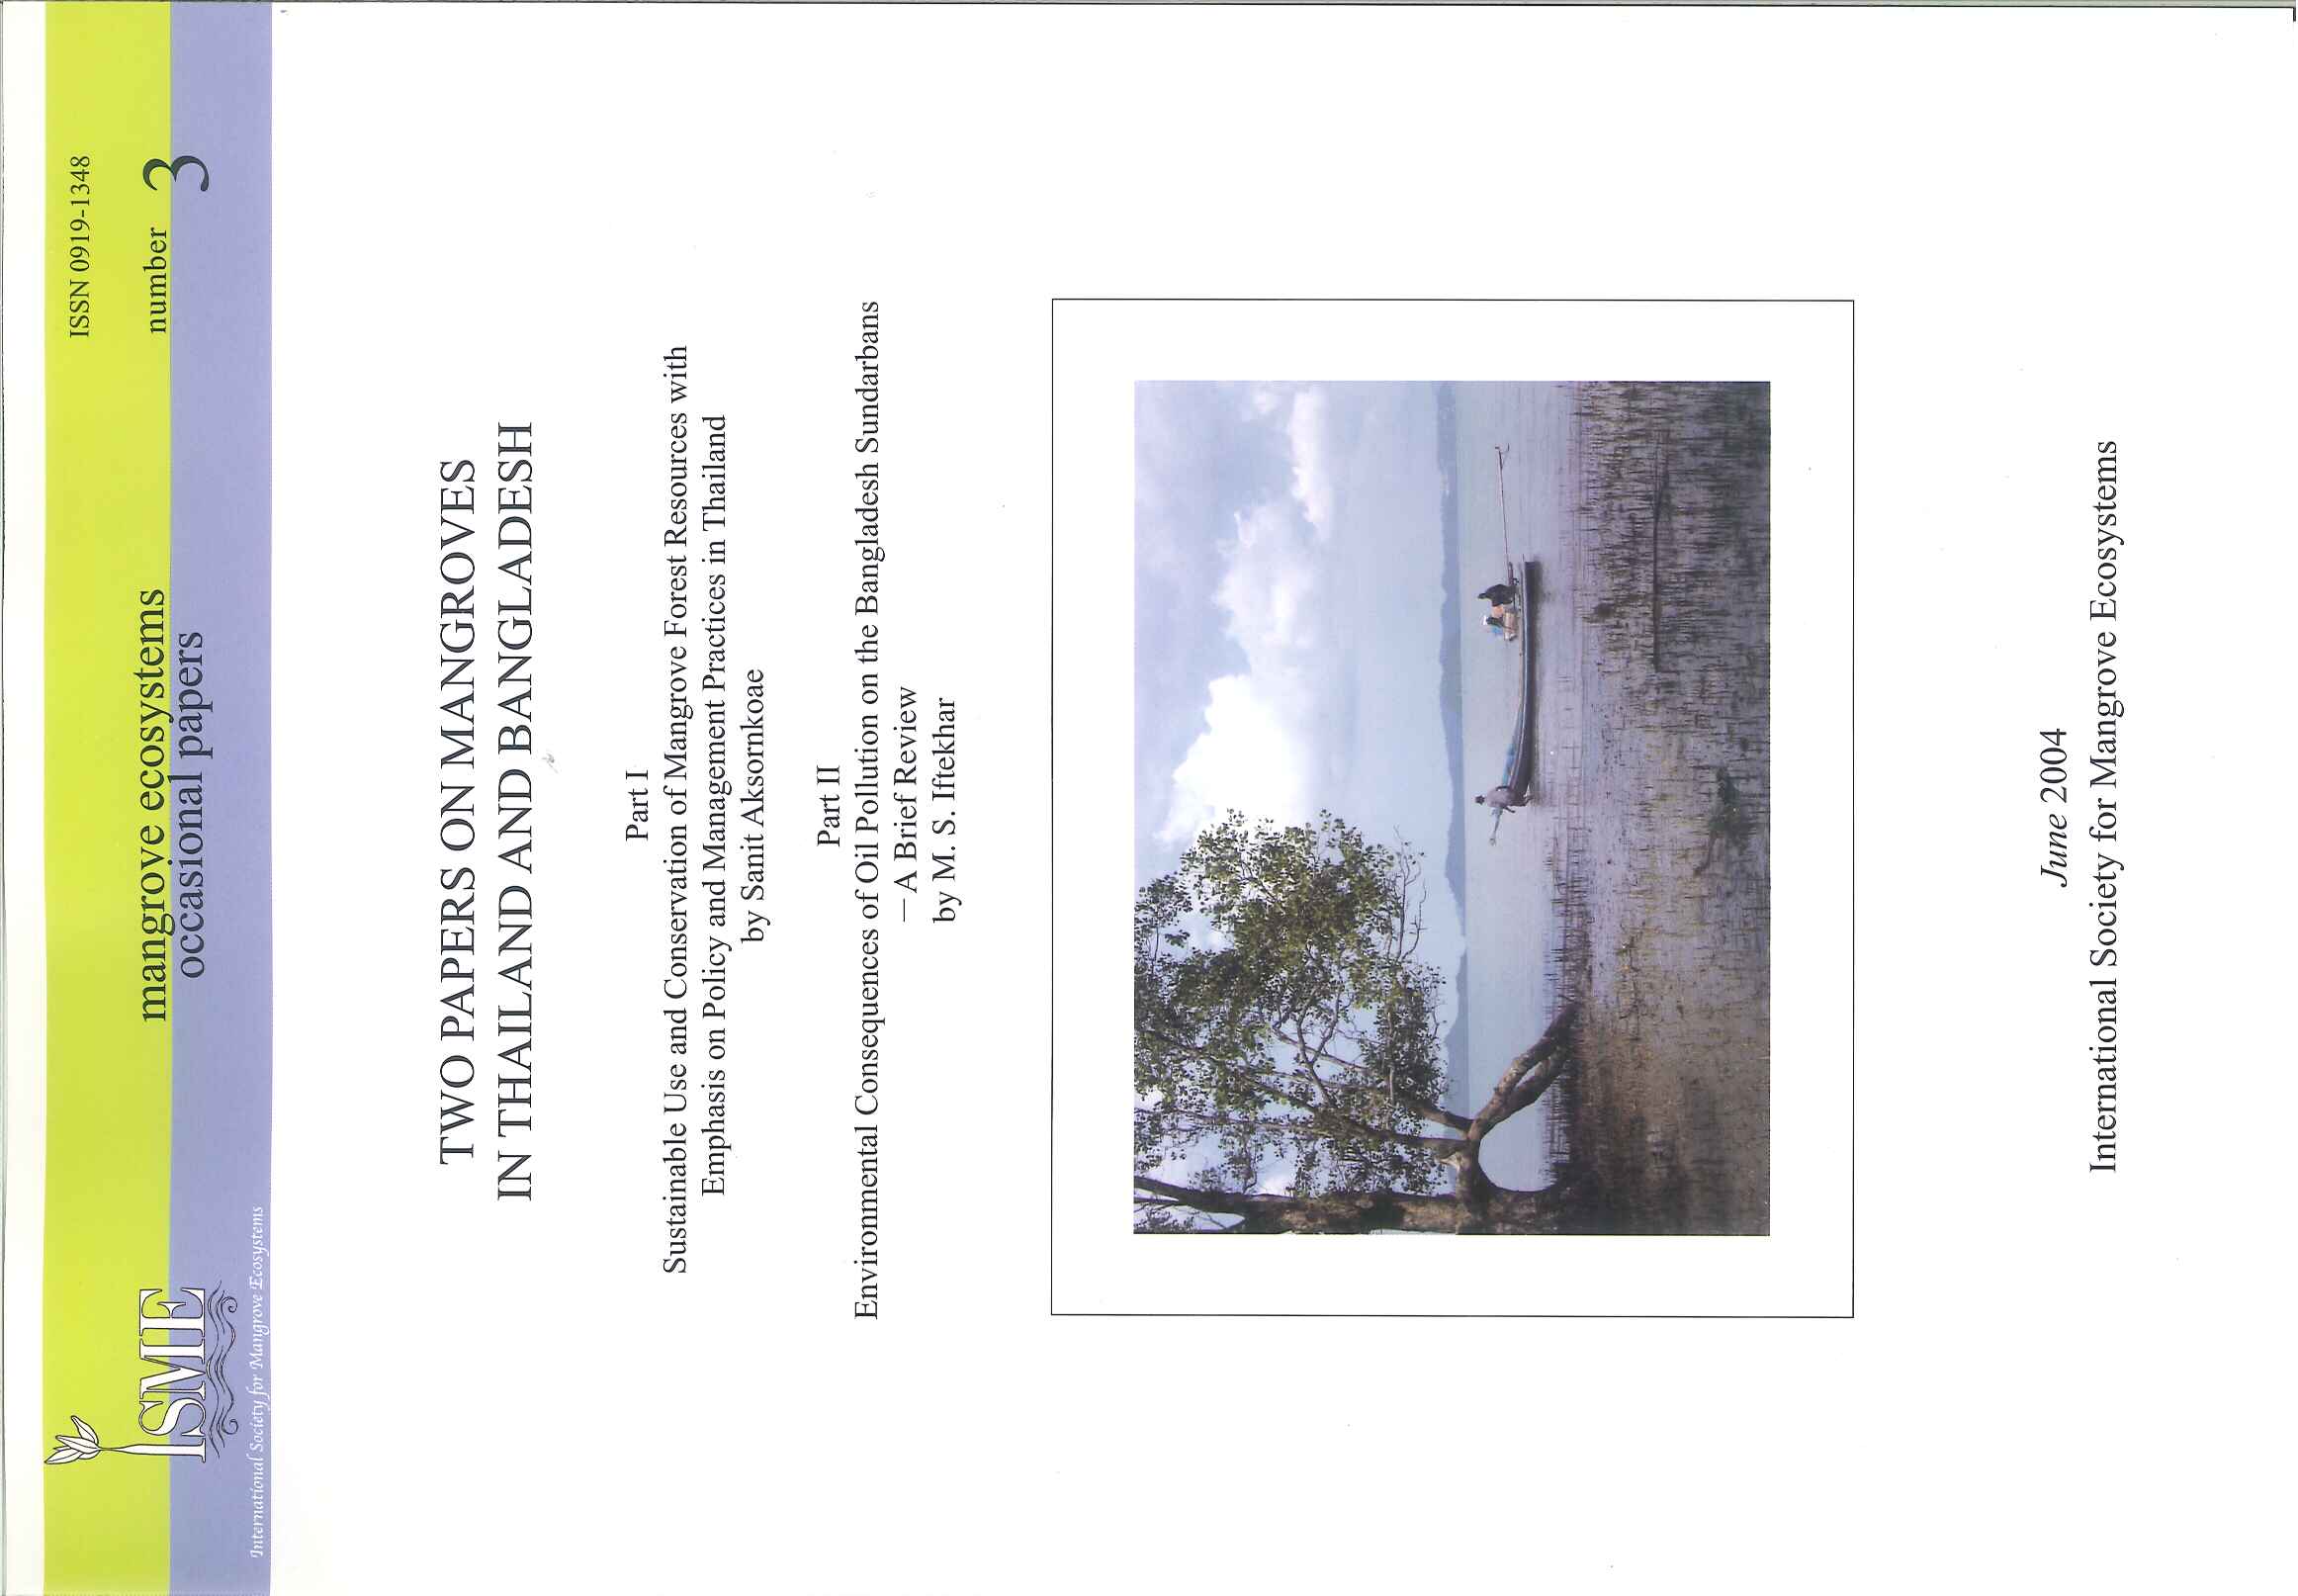 ISME Mangrove Ecosystems Occasional Papers No.3 -Two Papers on Mangroves in Thailand and Bangladesh